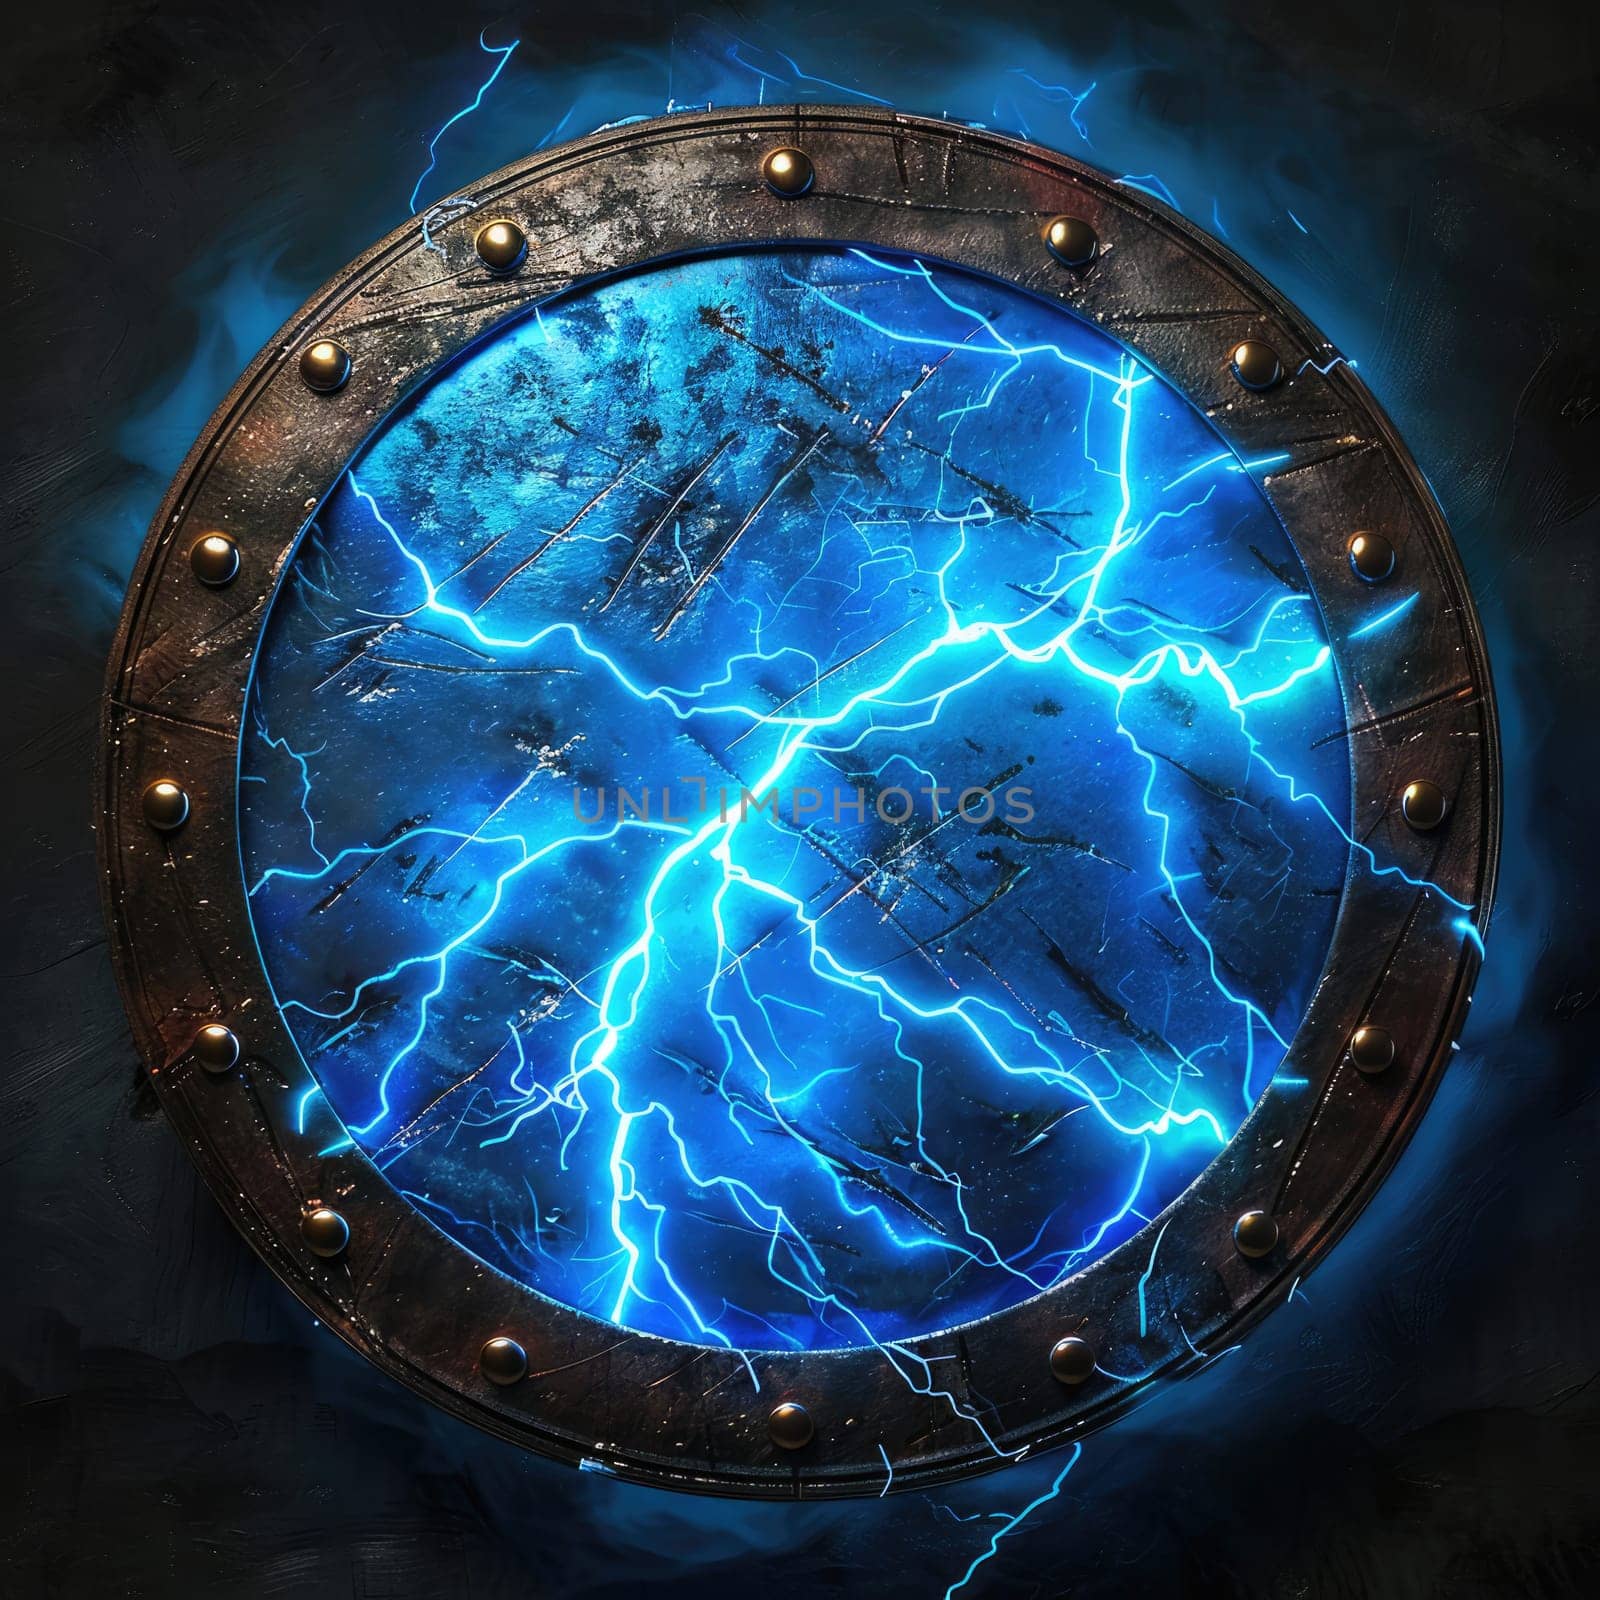 The shield crackled with blue lightning, creating an electrifying atmosphere. Fantasy element AI